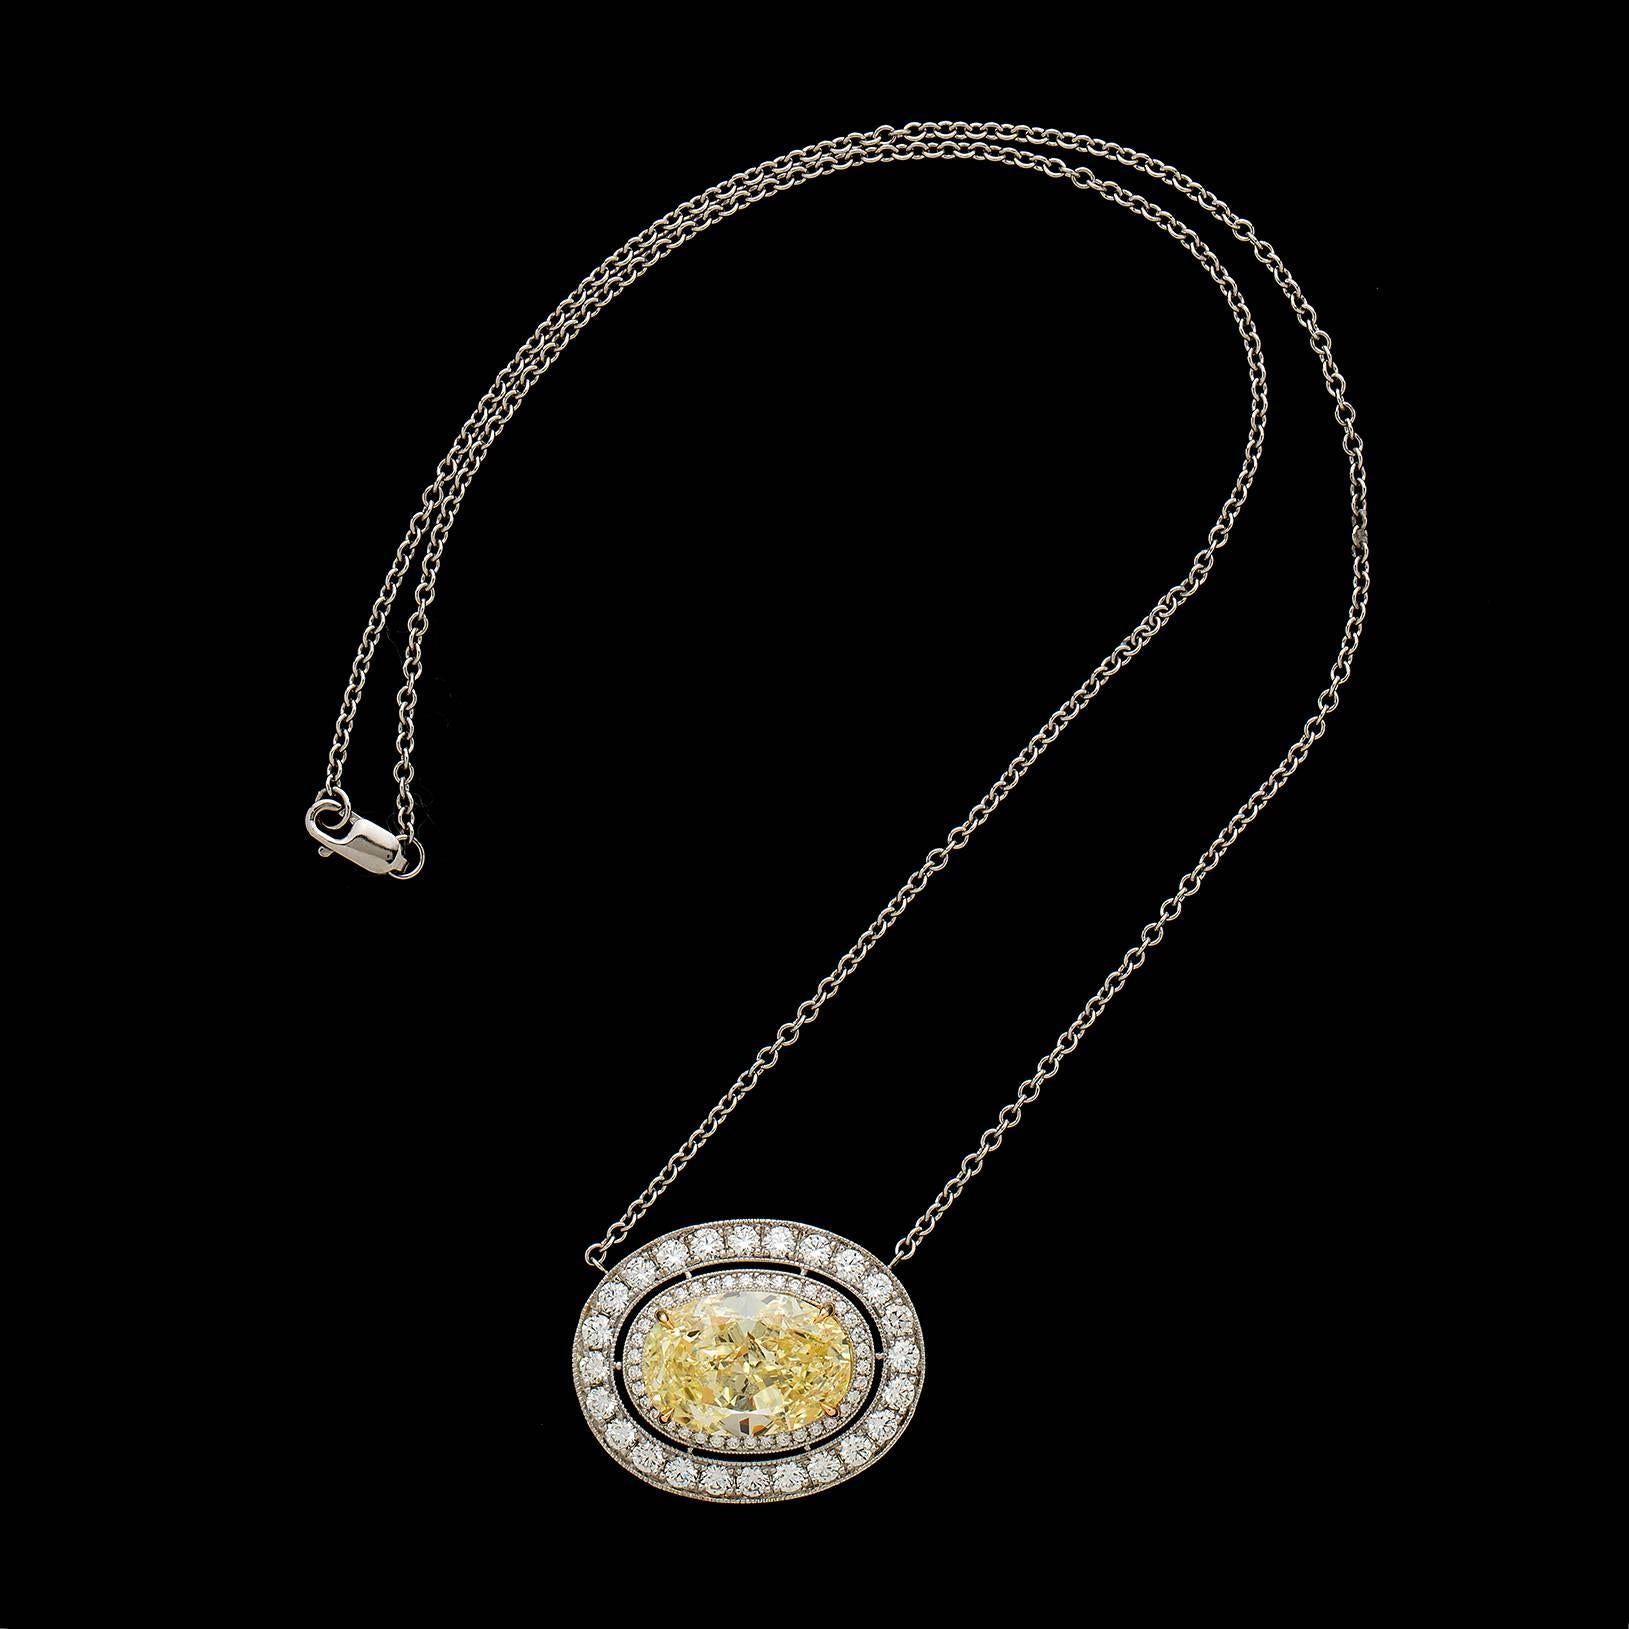 A truly extraordinary platinum and 18k yellow gold pendant-necklace featuring a fancy yellow oval-shaped diamond weighing 8.49 carats, surrounded by two concentric halos of near colorless round brilliant-cut diamonds, weighing in total 1.87 carats.